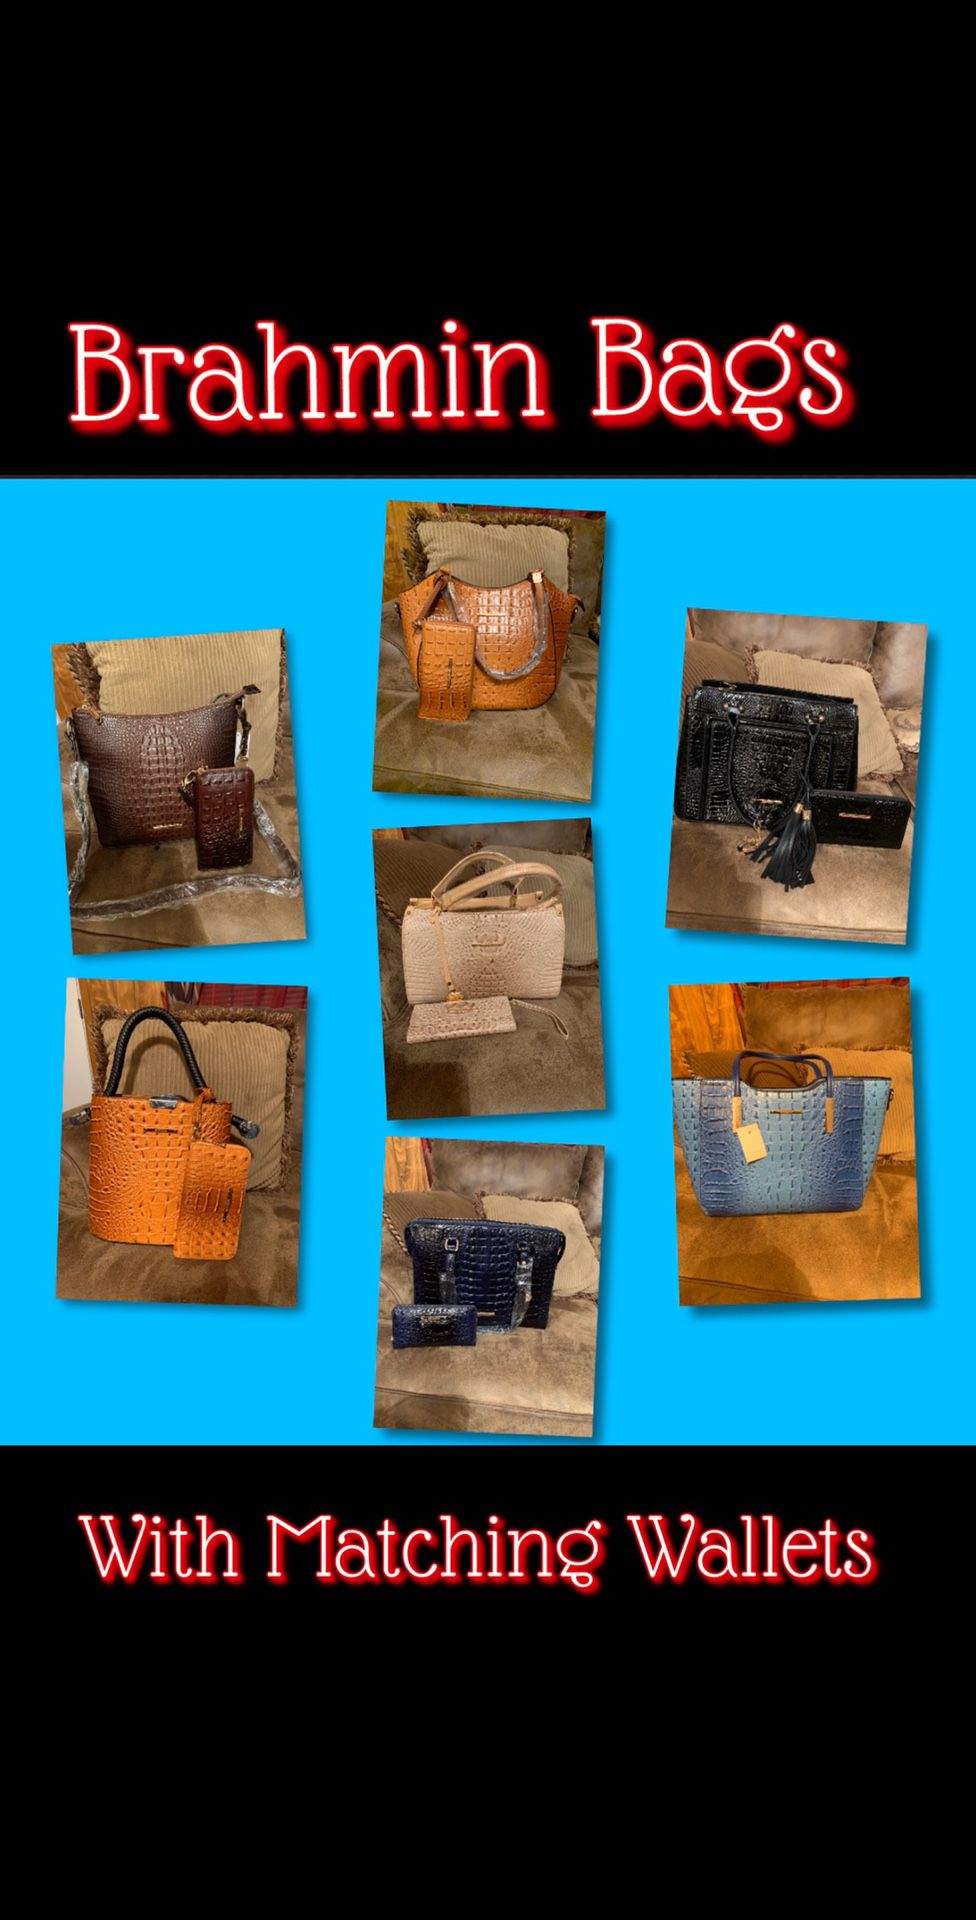 Brahmin Bags with matching wallets